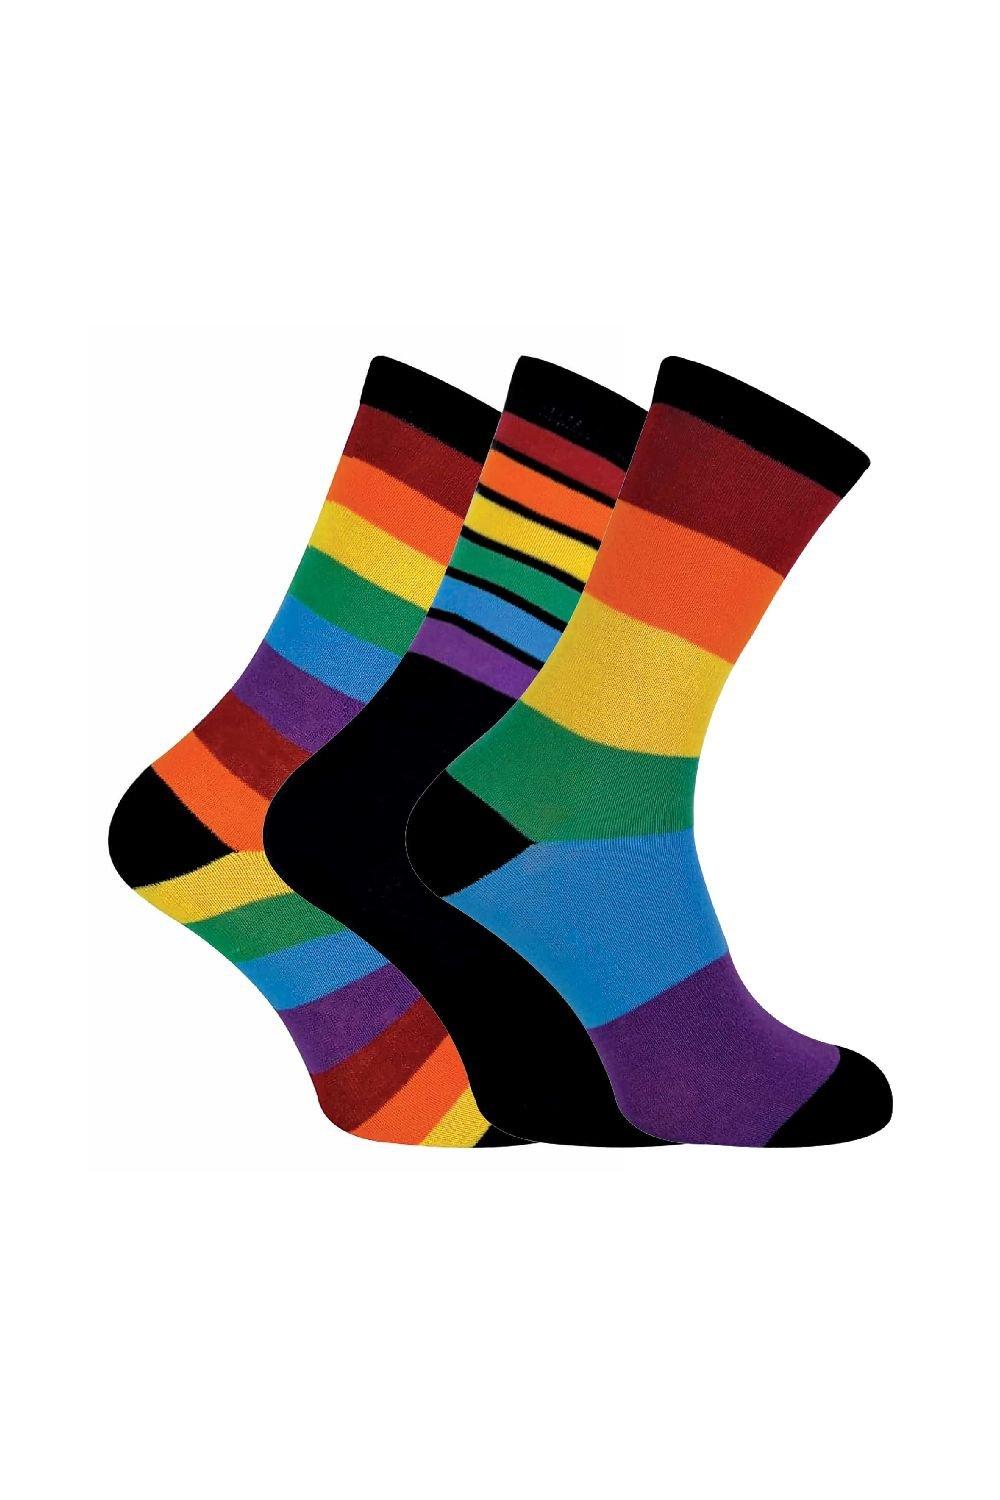 3 Pairs Bright Patterned Striped Colourful Rainbow Socks